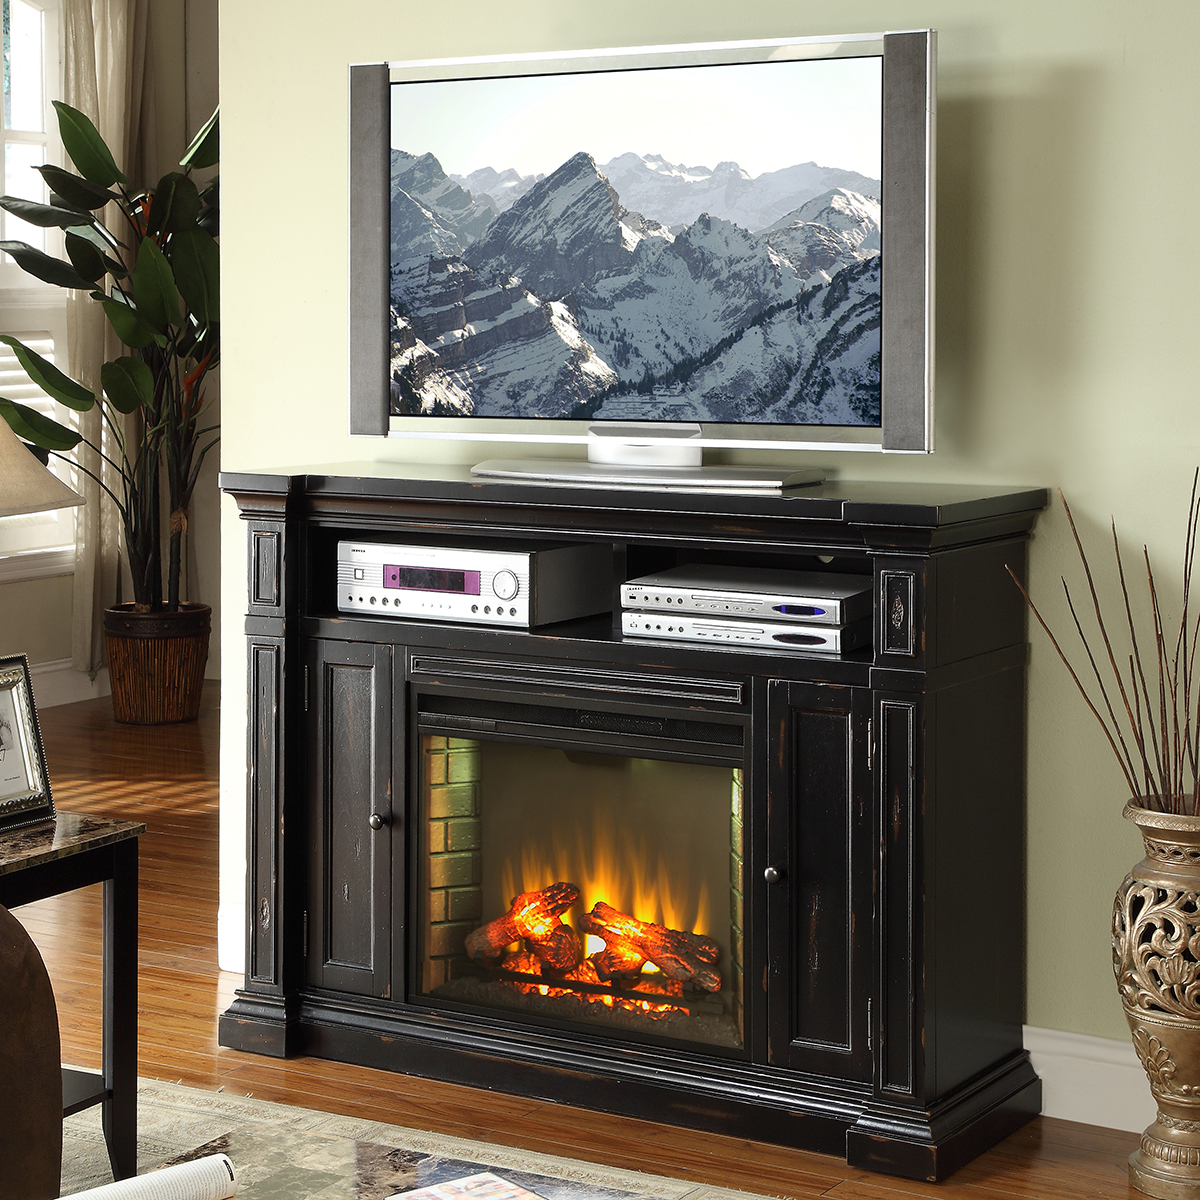 Tv Stand W Fireplace Elegant Manchester 58" Fireplace Media Center Tv Stand Mantel In